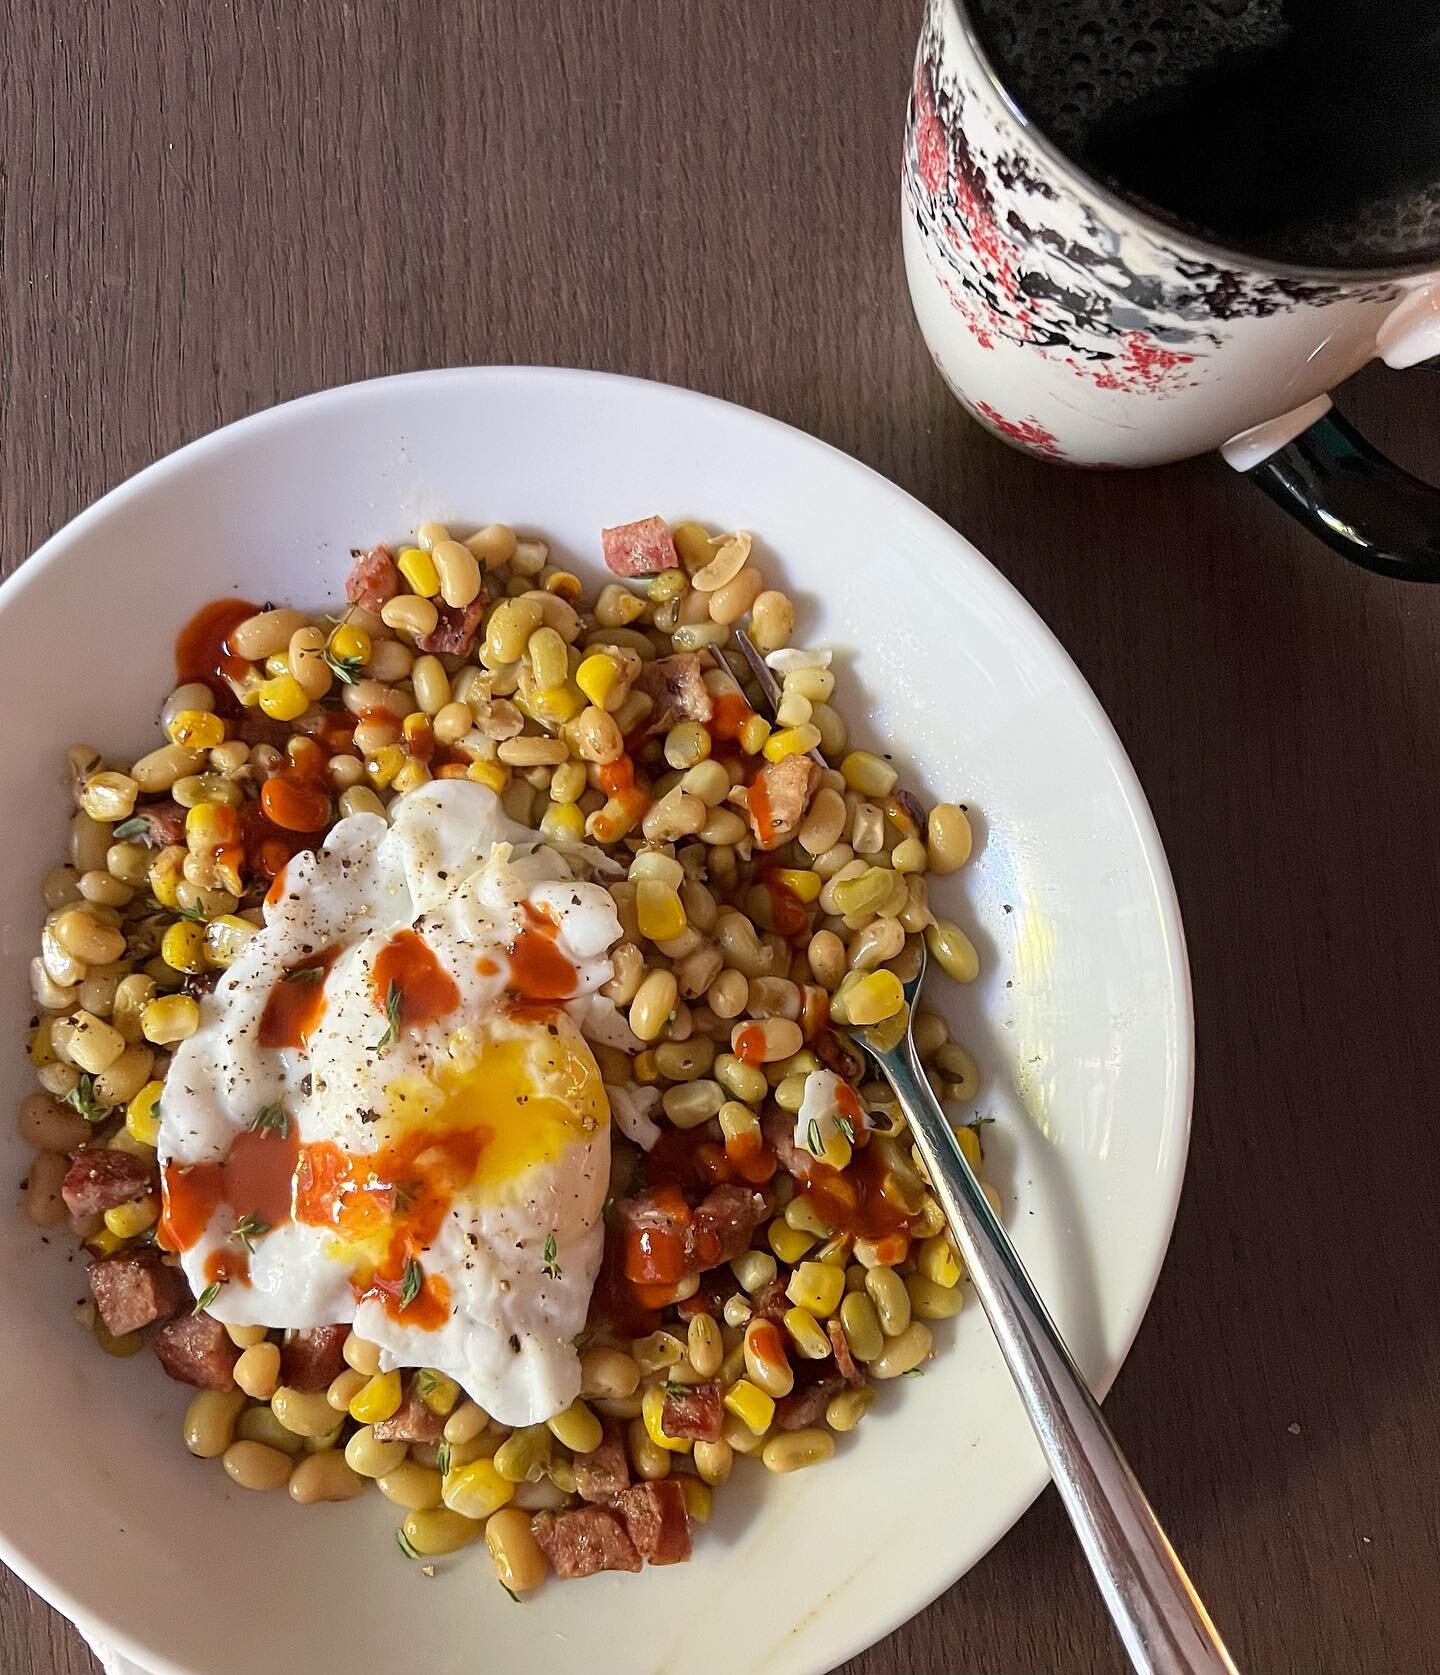 Leftover lady peas for breakfast! With corn, a little #conecuhsausage, a mangled (but delicious) poached egg, and some hot sauce. As we sometimes say, &ldquo;It&rsquo;ll eat.&rdquo; PDG, tbh. #ladypeas #fieldpeas #breakfast #leftovers